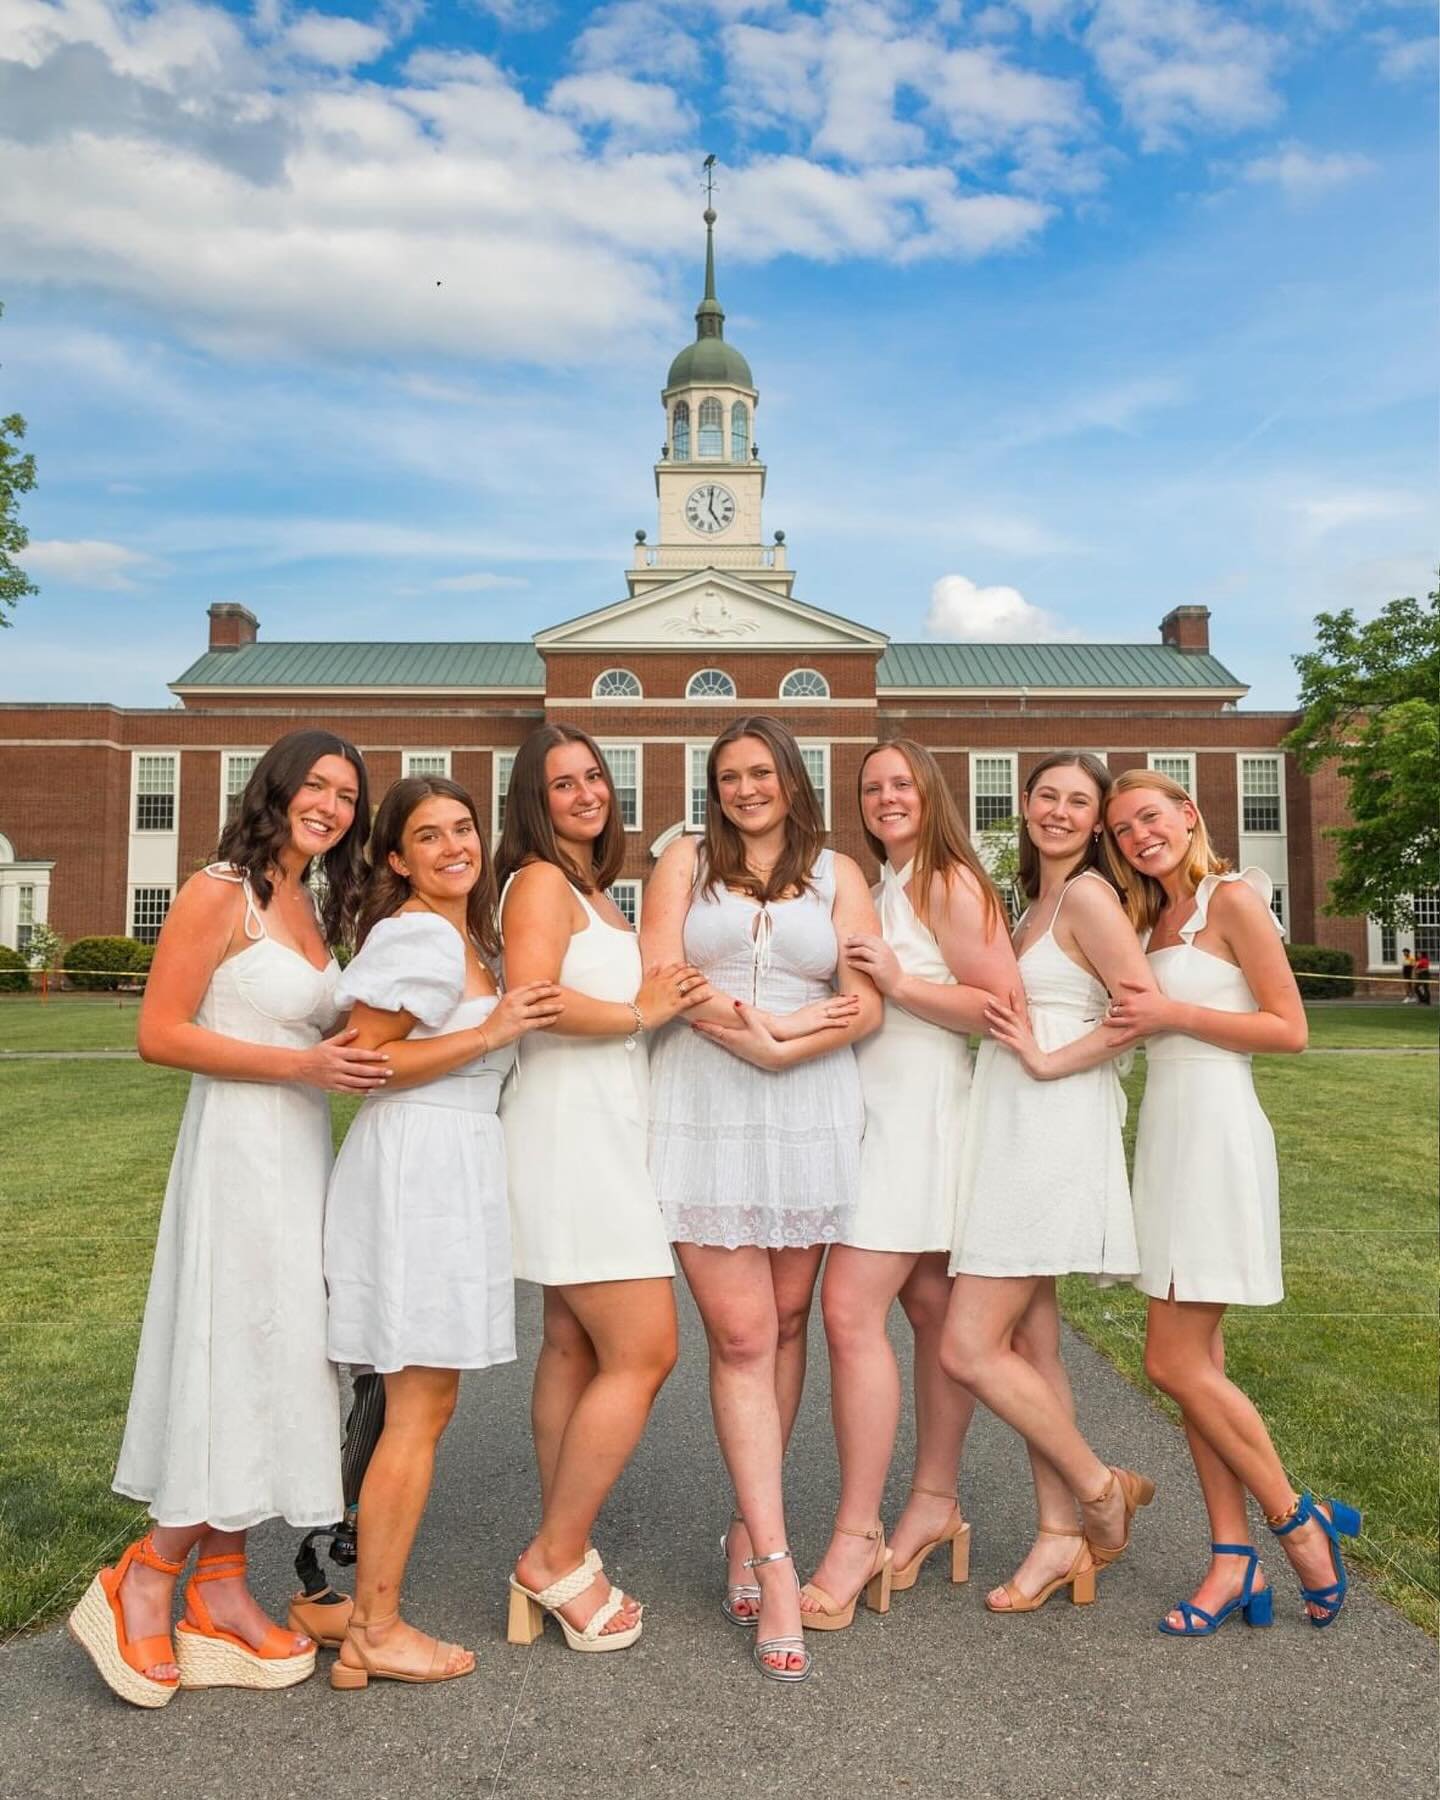 These girls were such a delight to photograph at Bucknell. We lucked out with a beautiful day and so much laughter and even dancing. I&rsquo;m so happy that their session will be such a memorable one 🫶.

Congratulations ladies! 🎓🎉

#askforamber #c